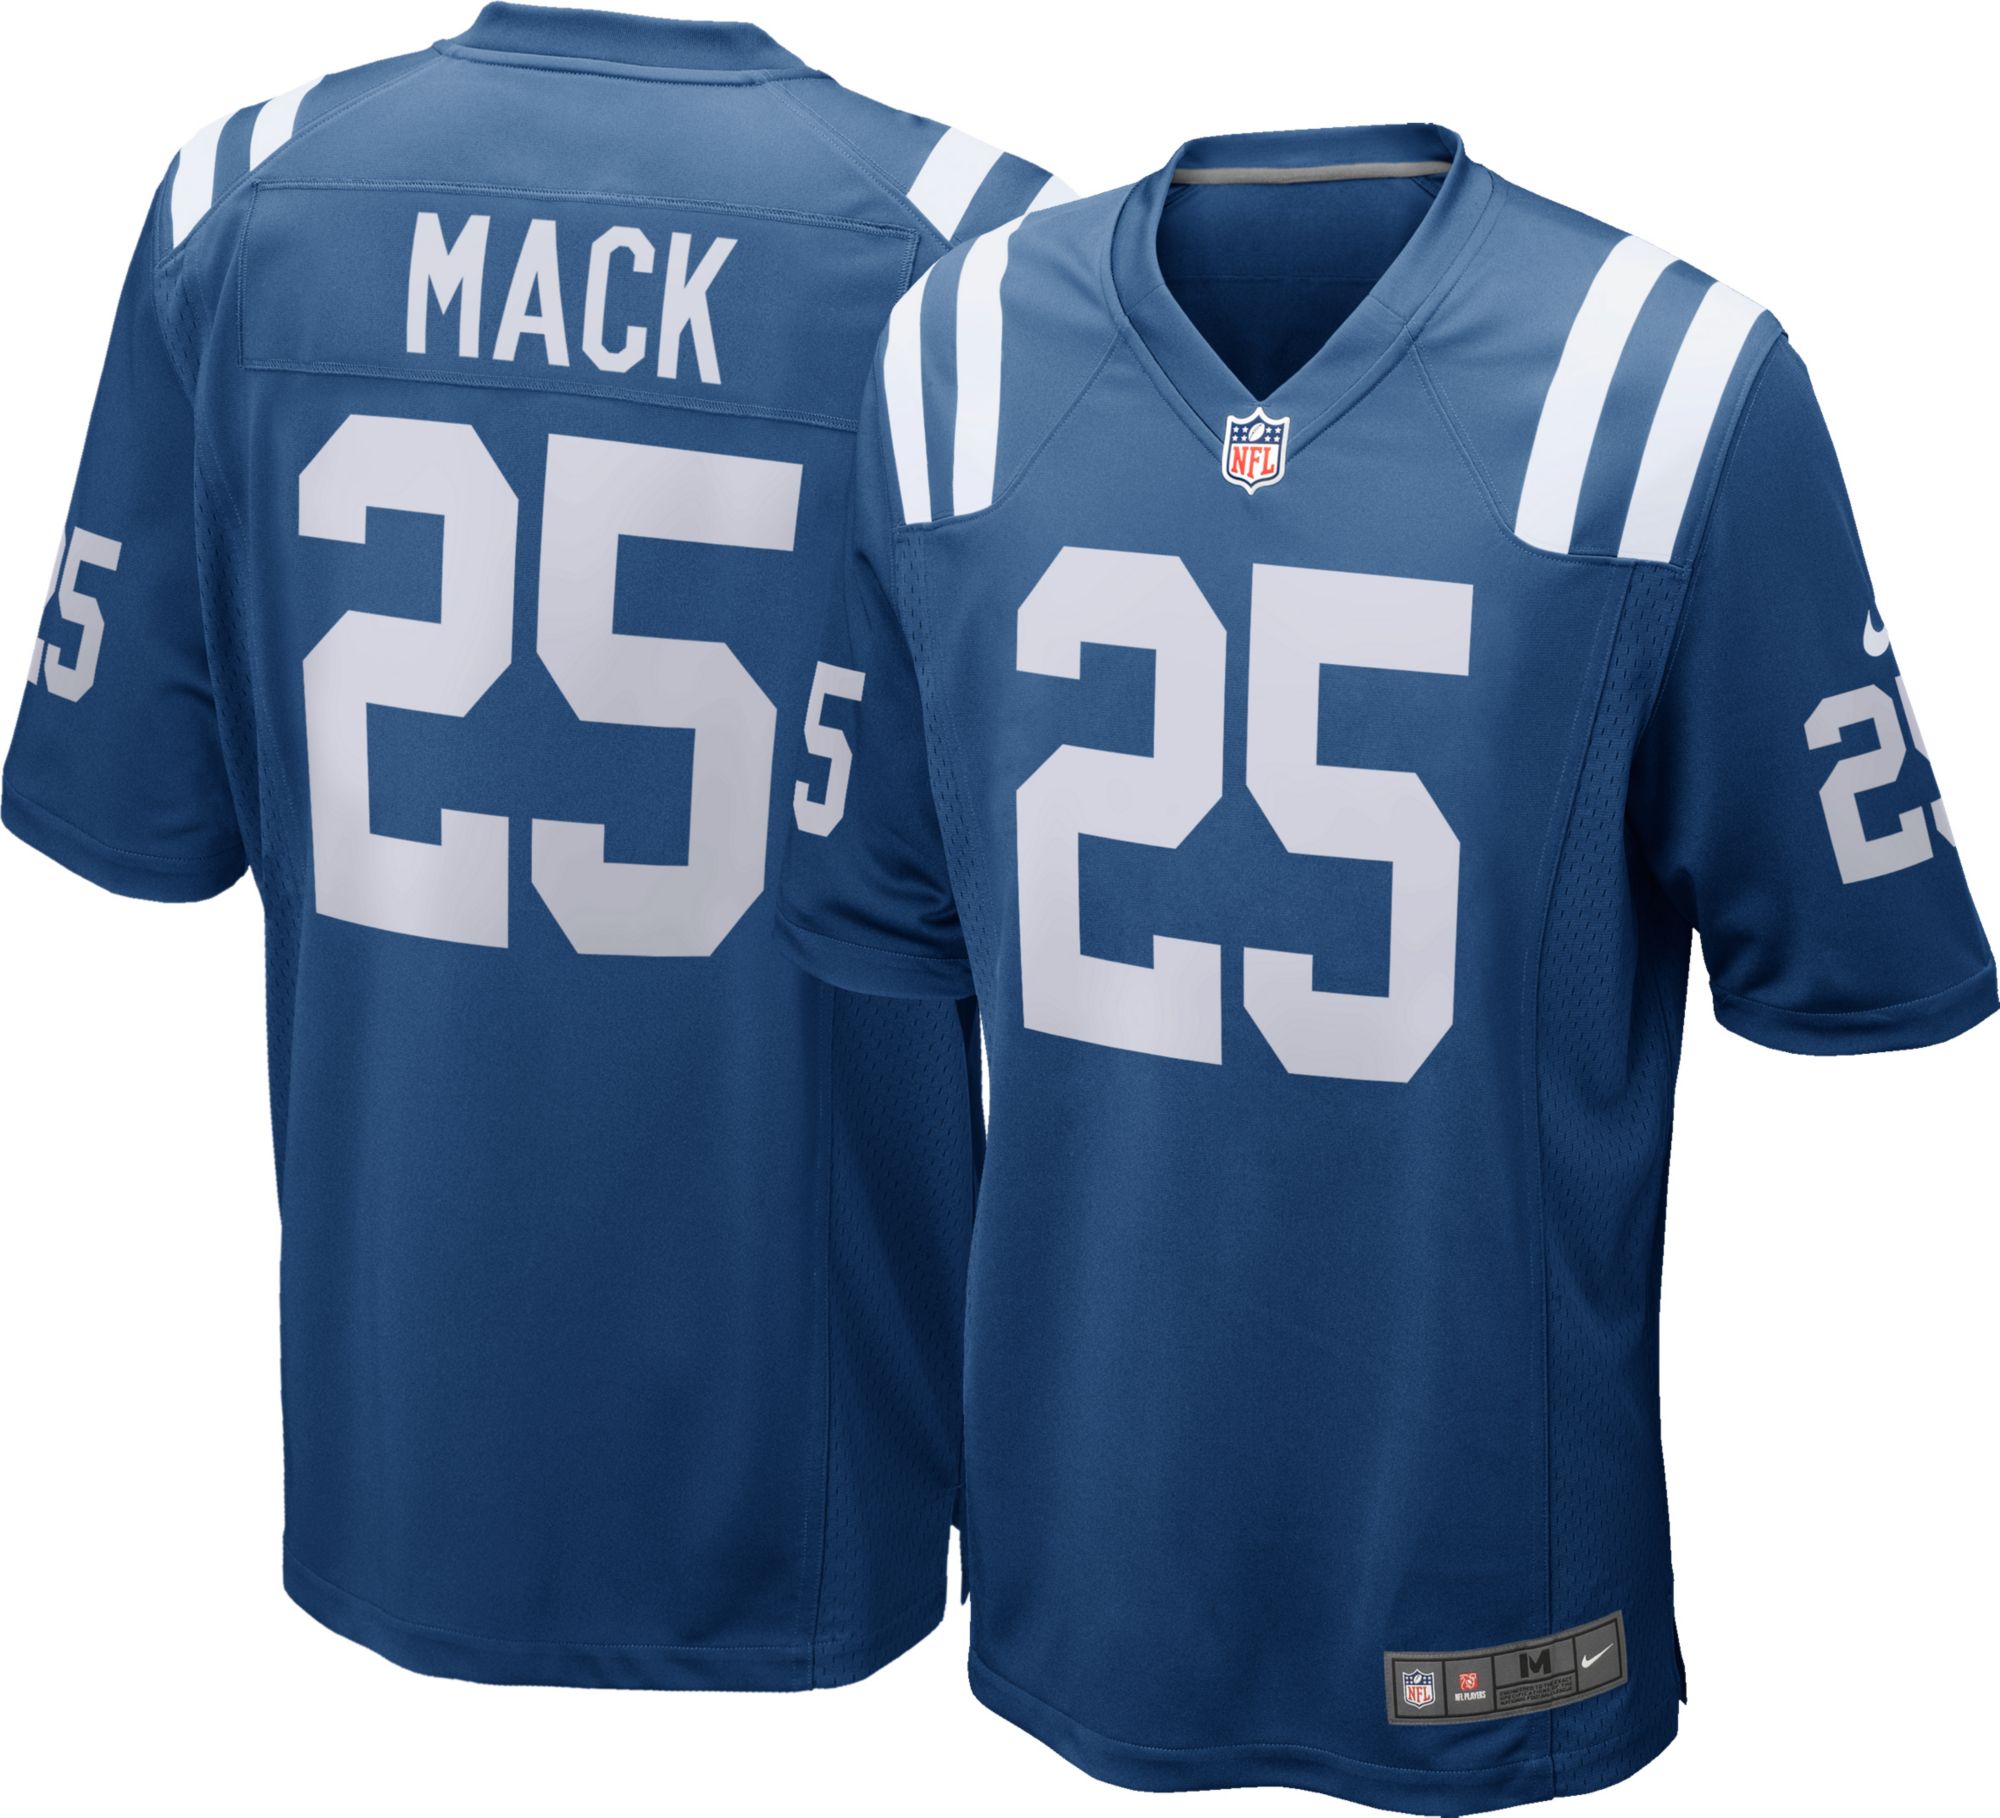 indianapolis colts away jersey